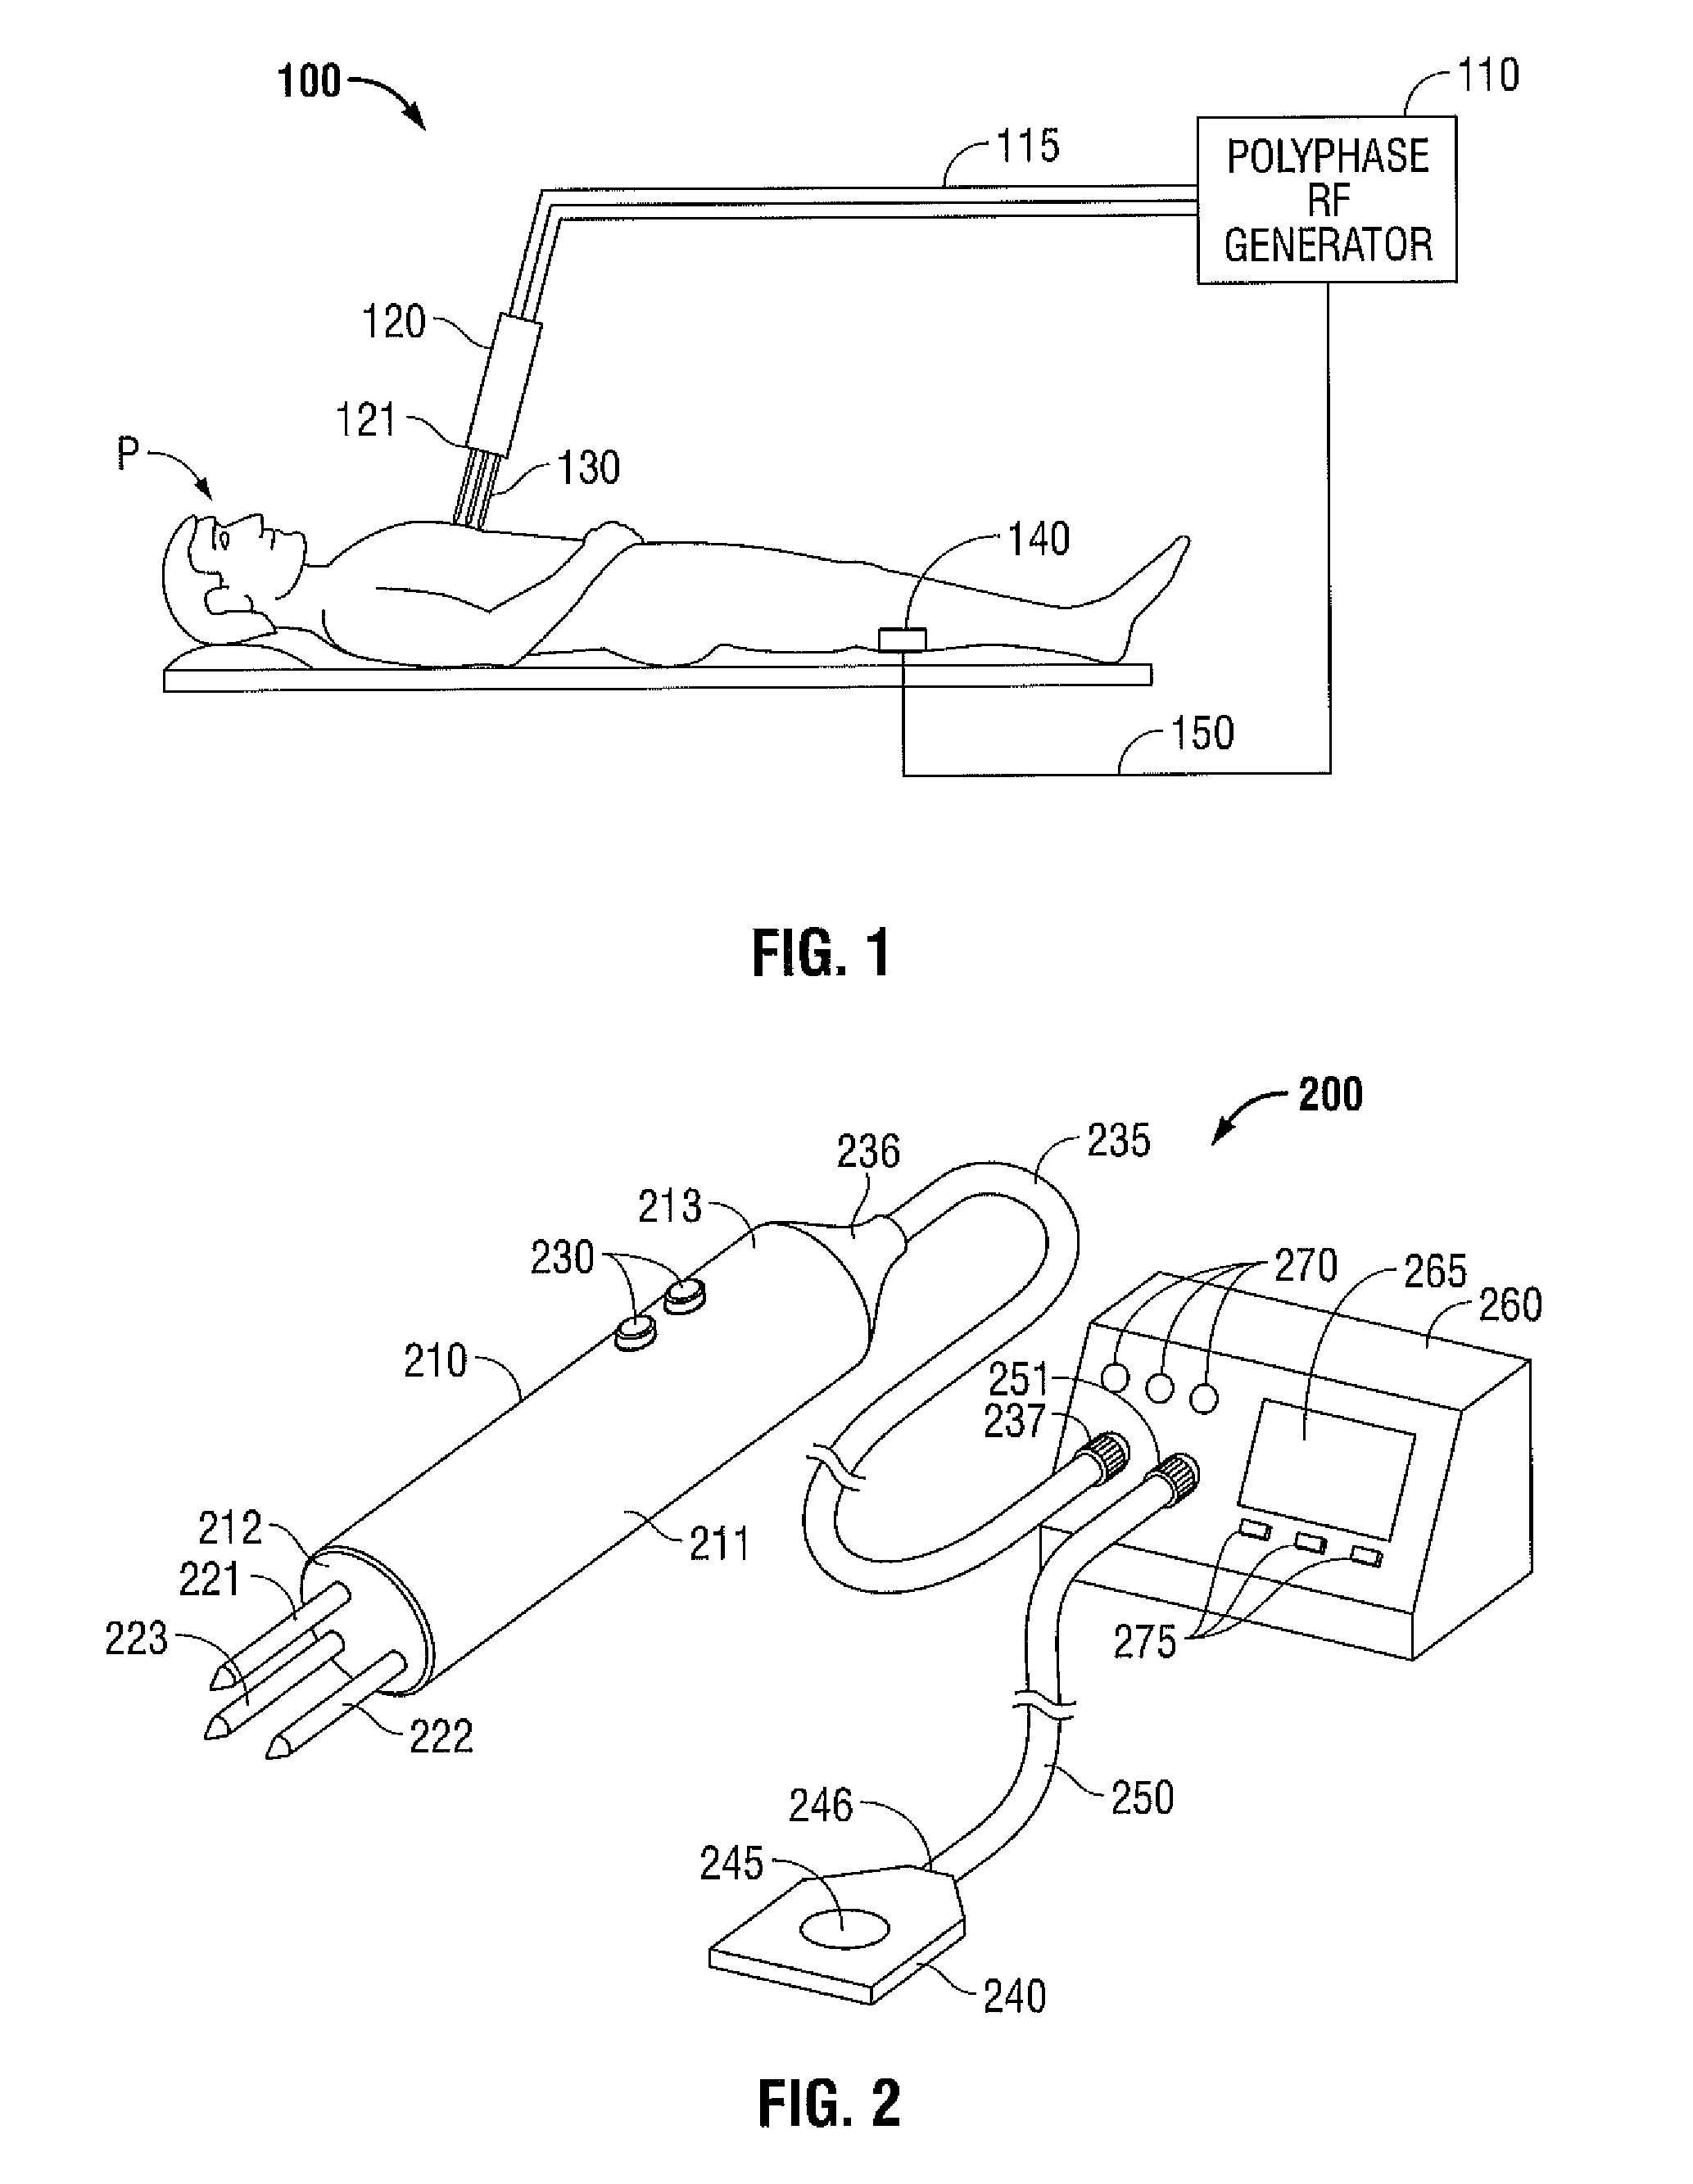 Polyphase Electrosurgical System and Method